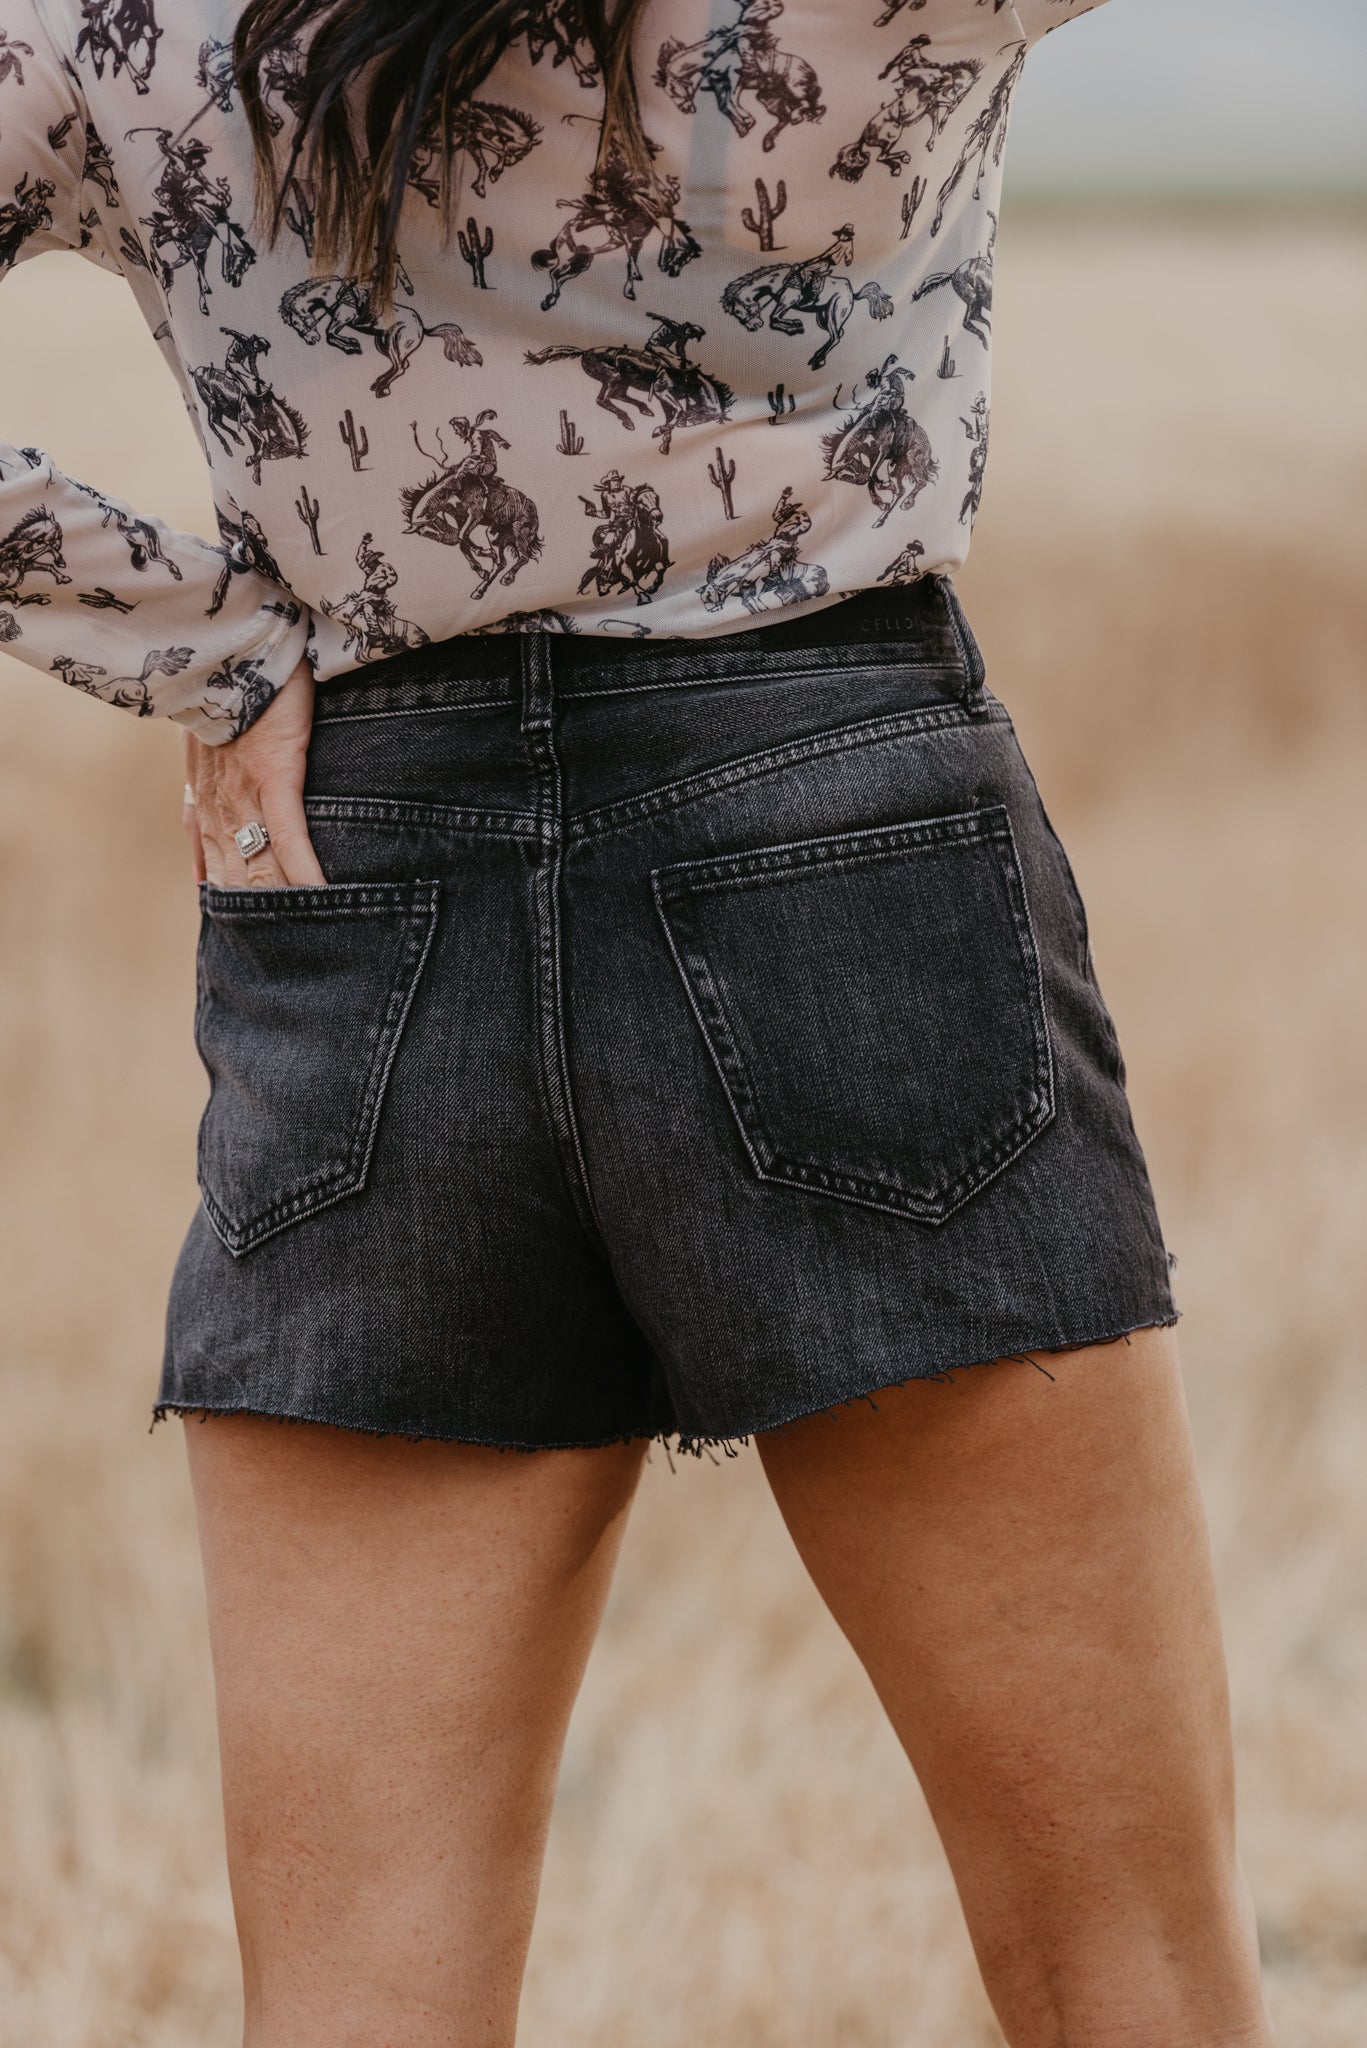 The Black Label Distressed Shorts